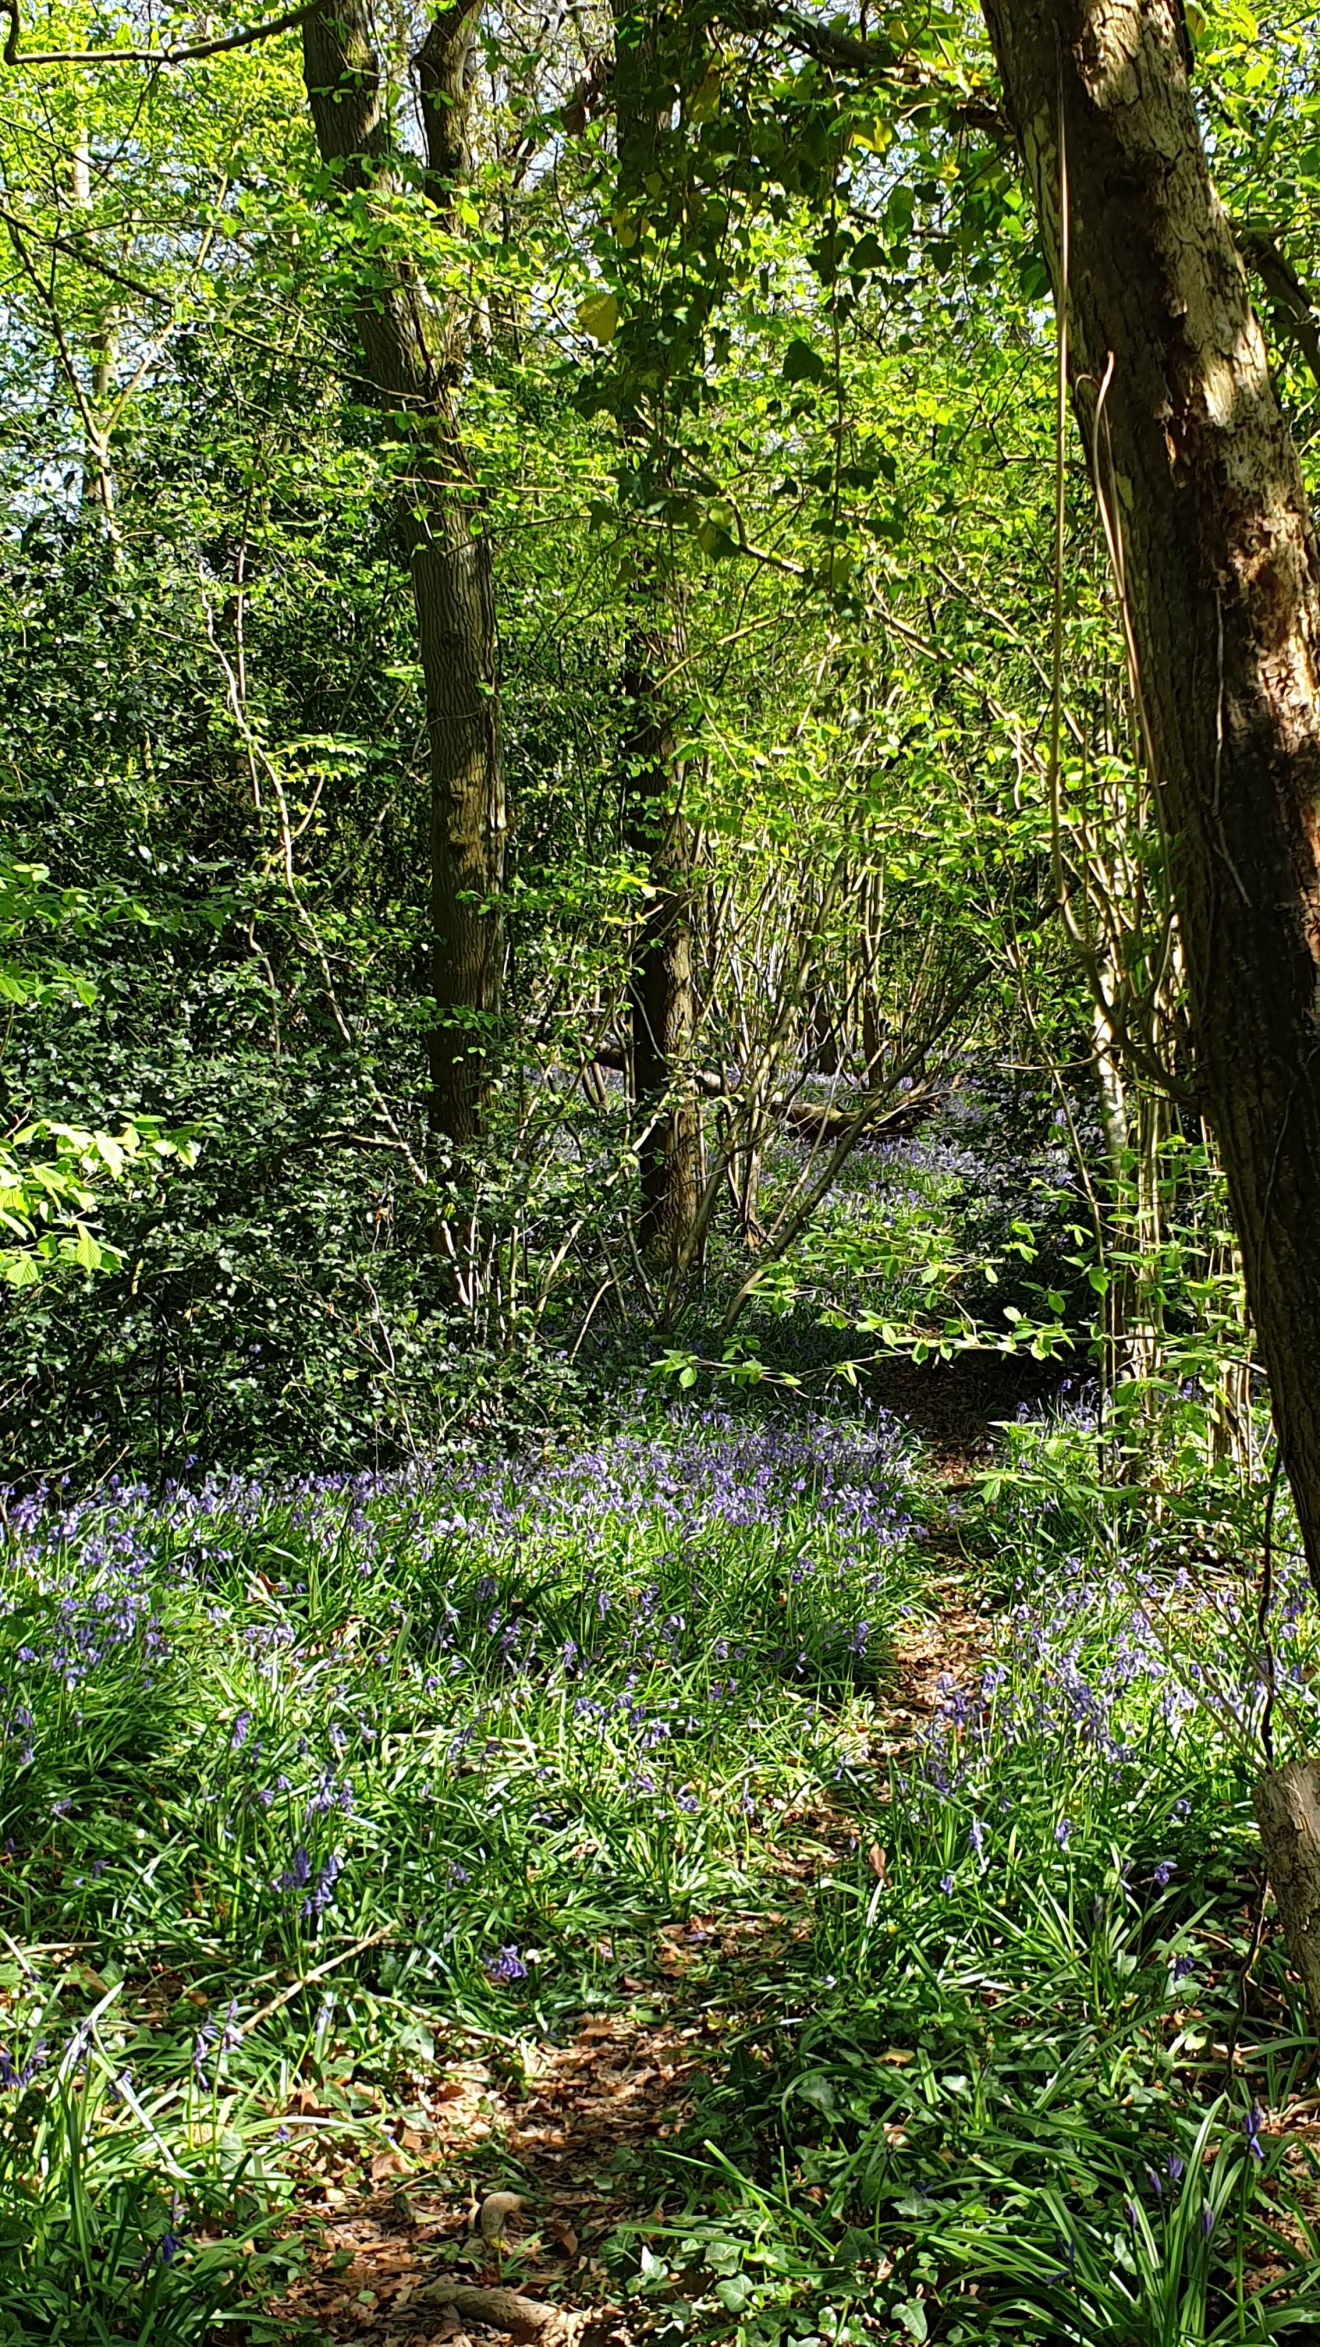 Fiona's walk - The bluebells are all out in the woods now and look amazing. I find that walking every day alone, there is so much to look at and marvel at!